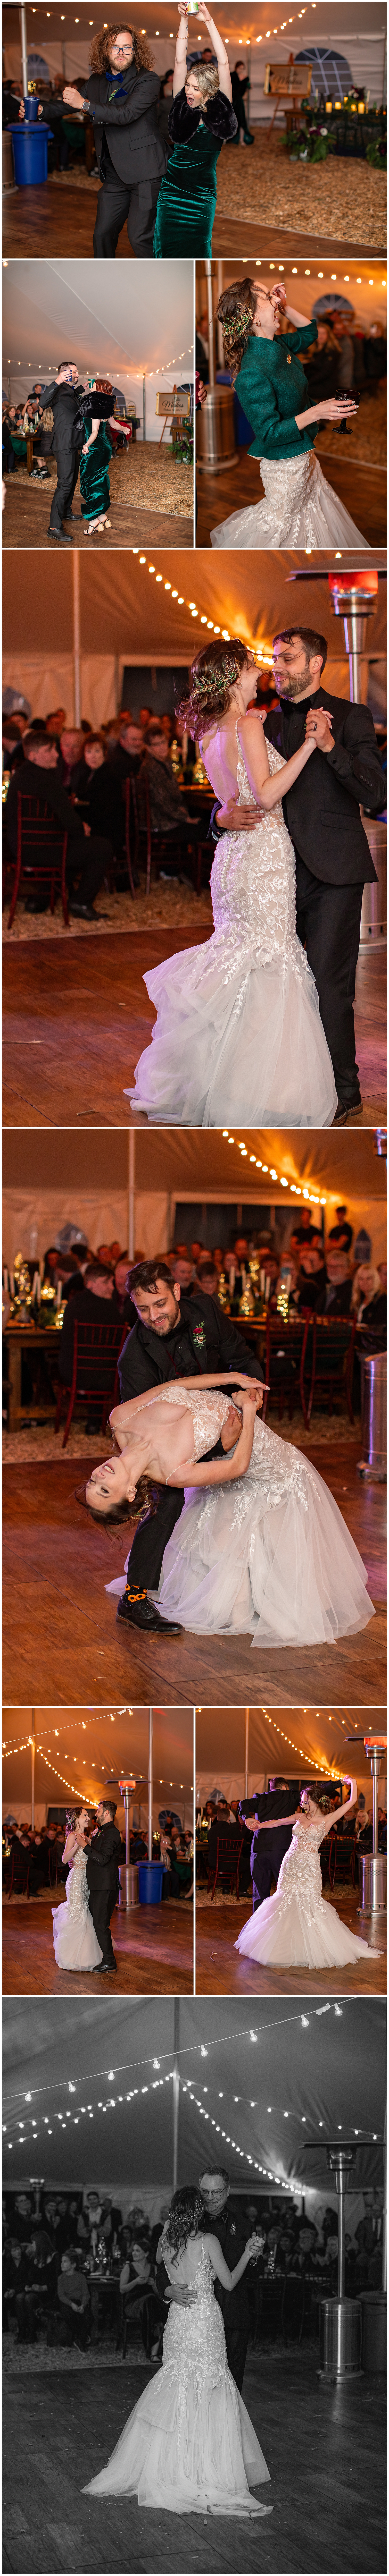 tented first dance and wedding reception